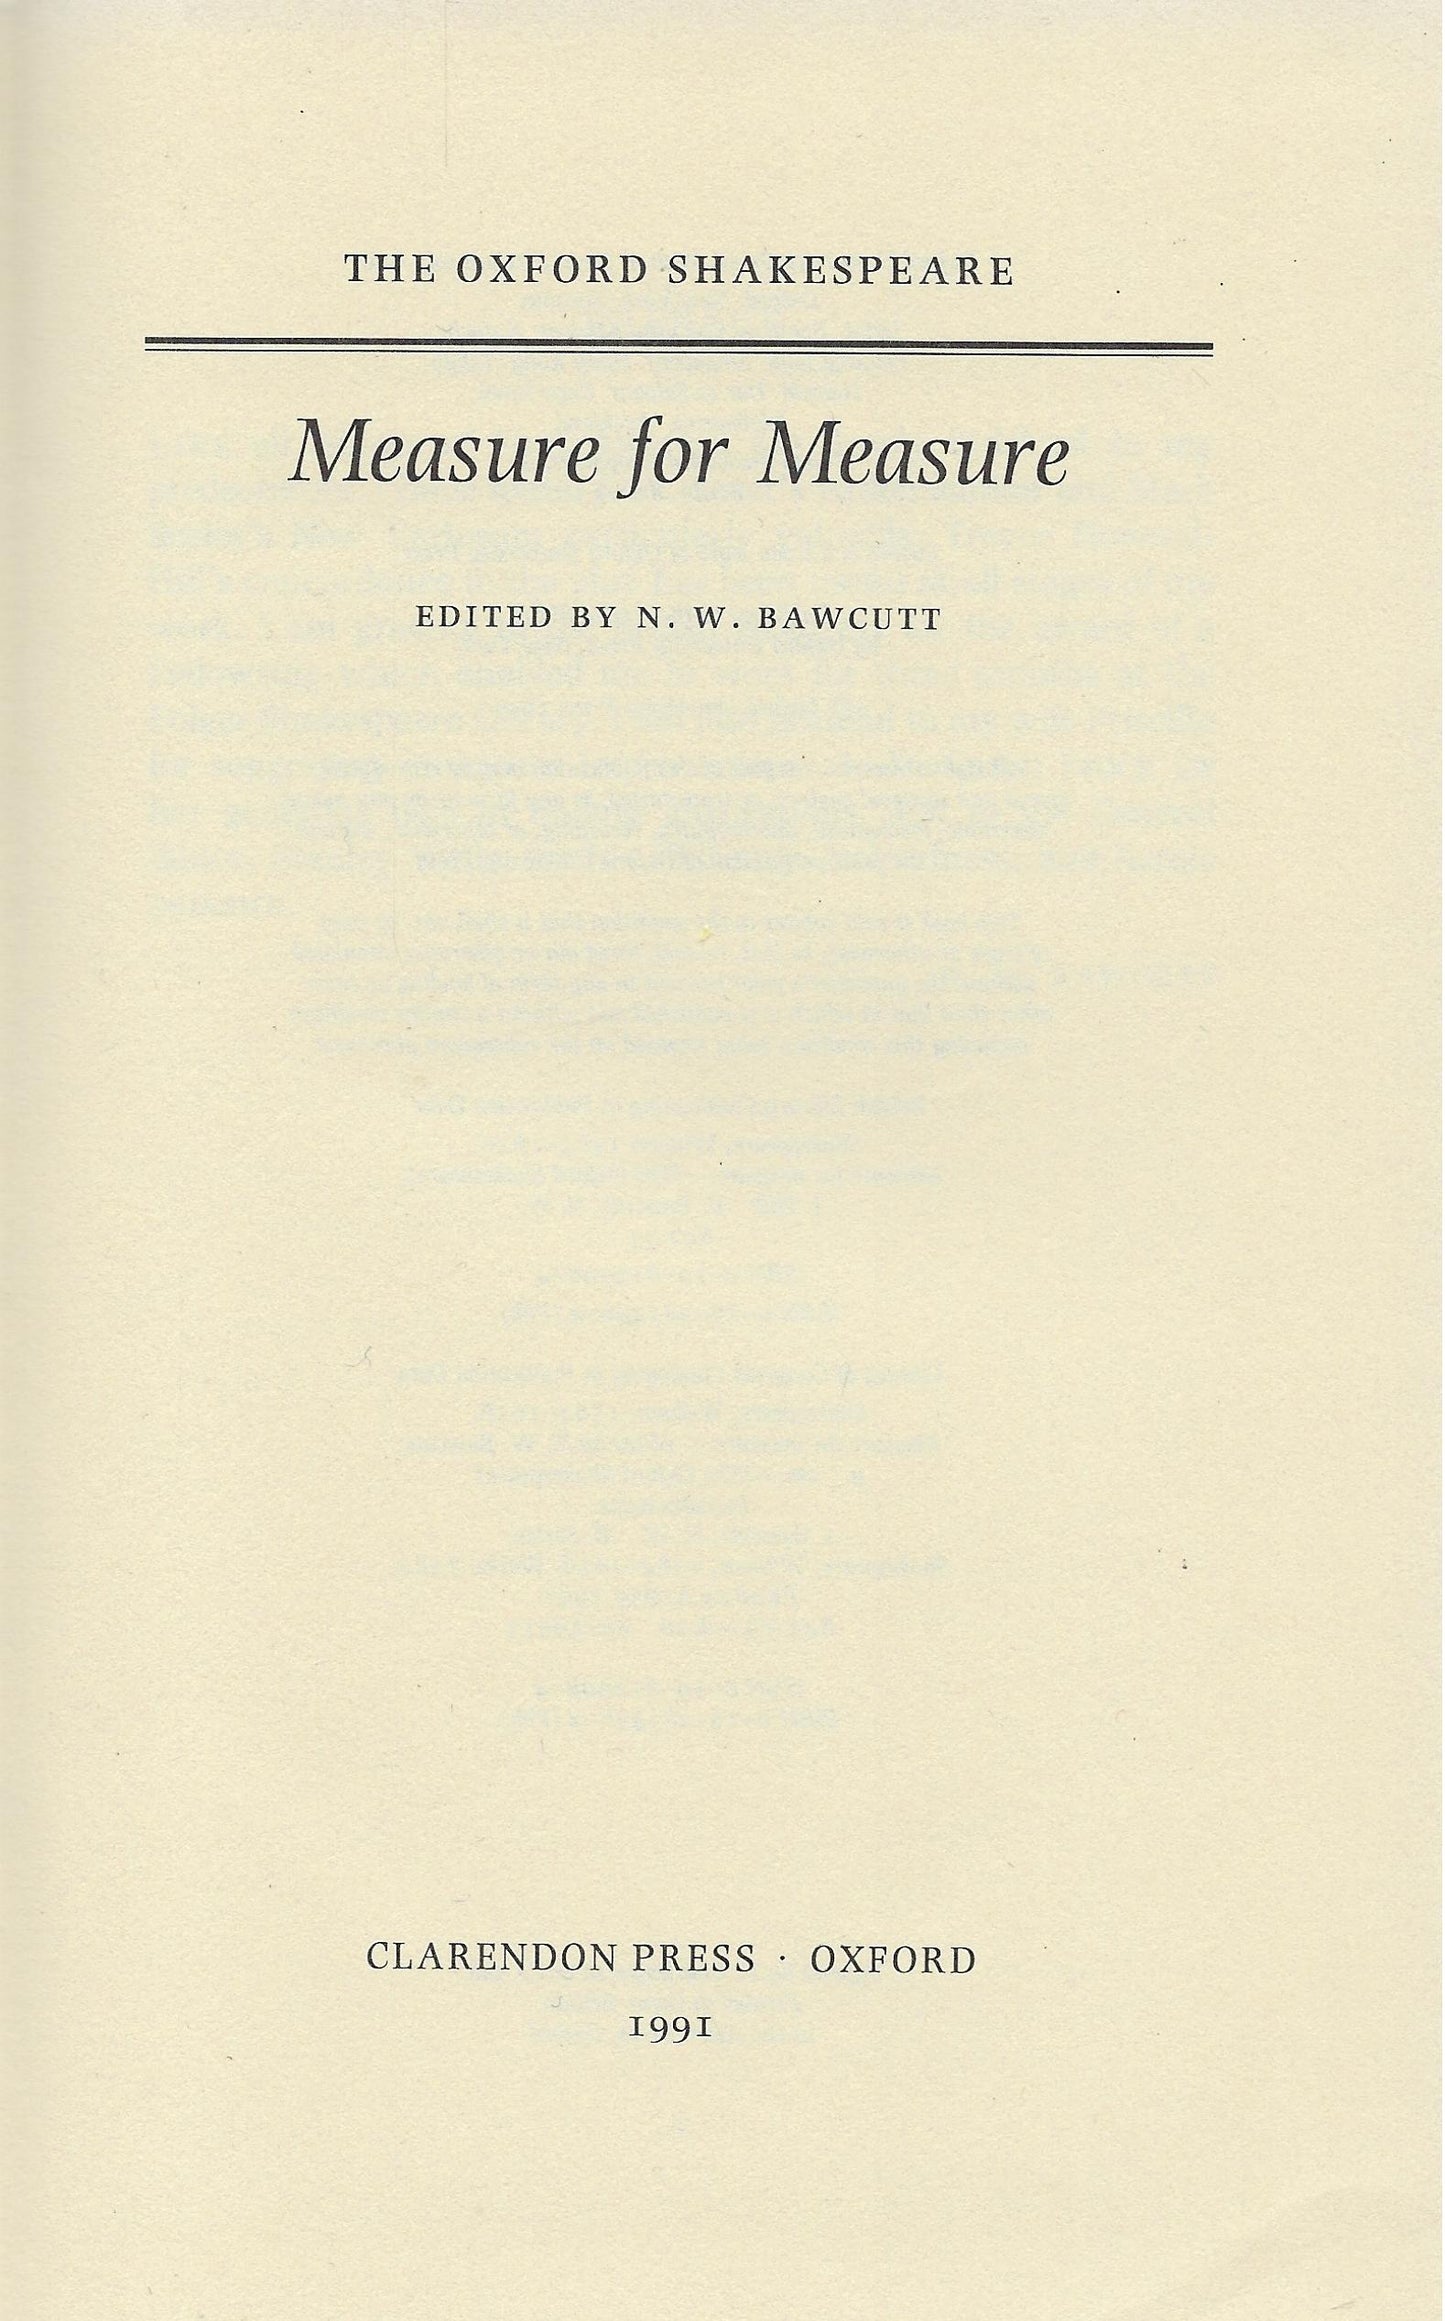 Measure for measure (The Oxford Shakespeare)